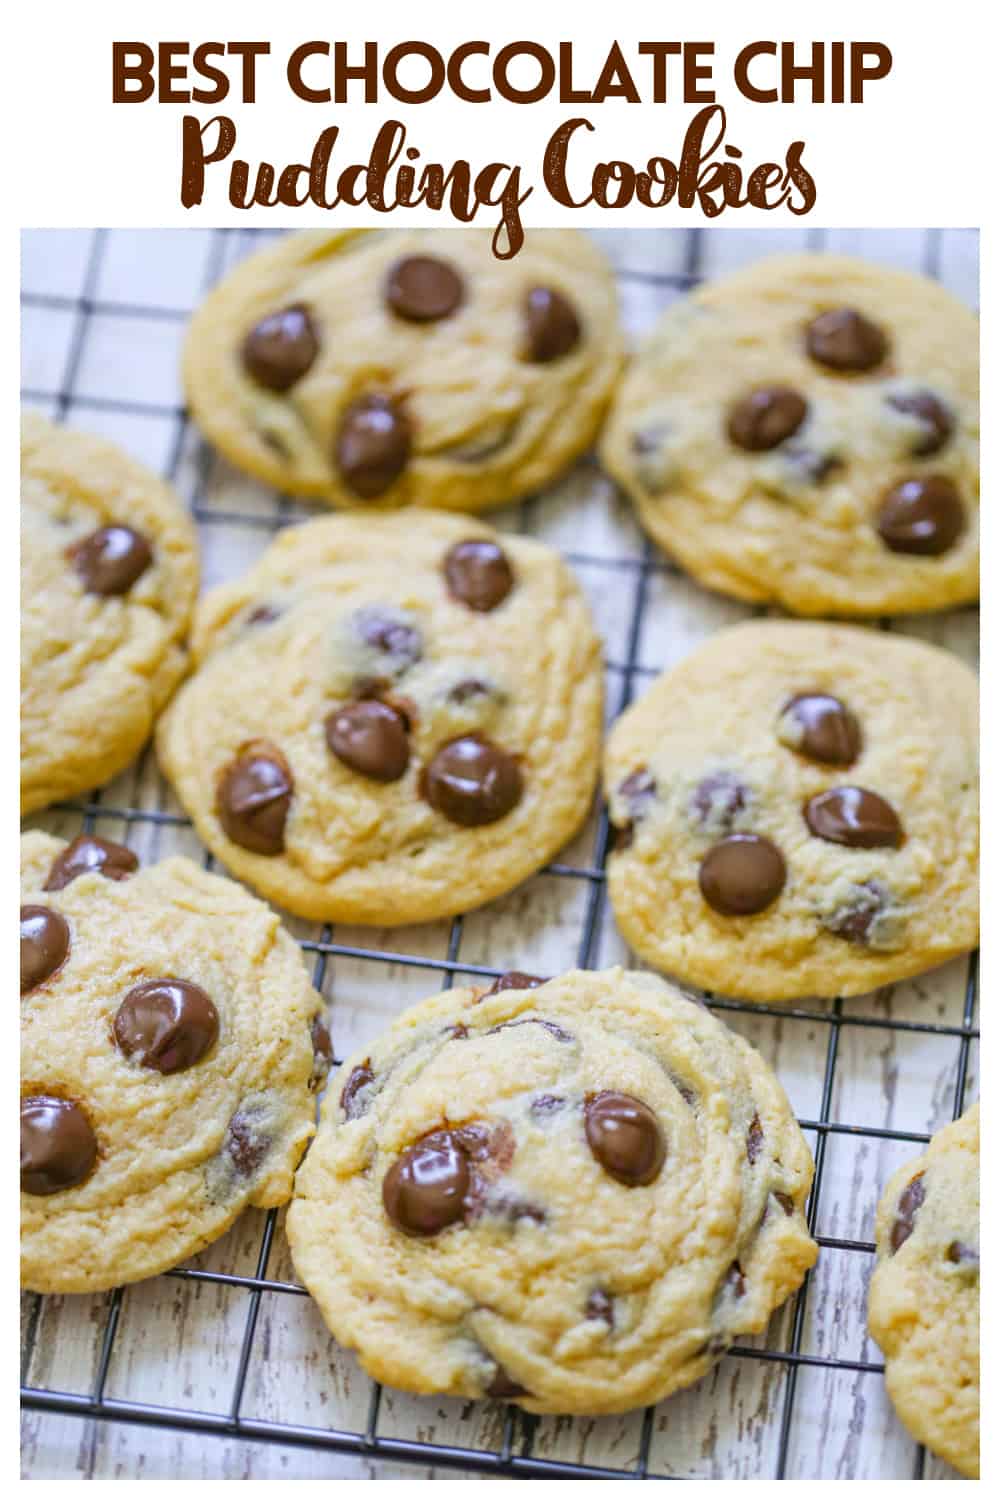 Home-made Chocolate Chip Pudding Cookies - The Baking ChocolaTess